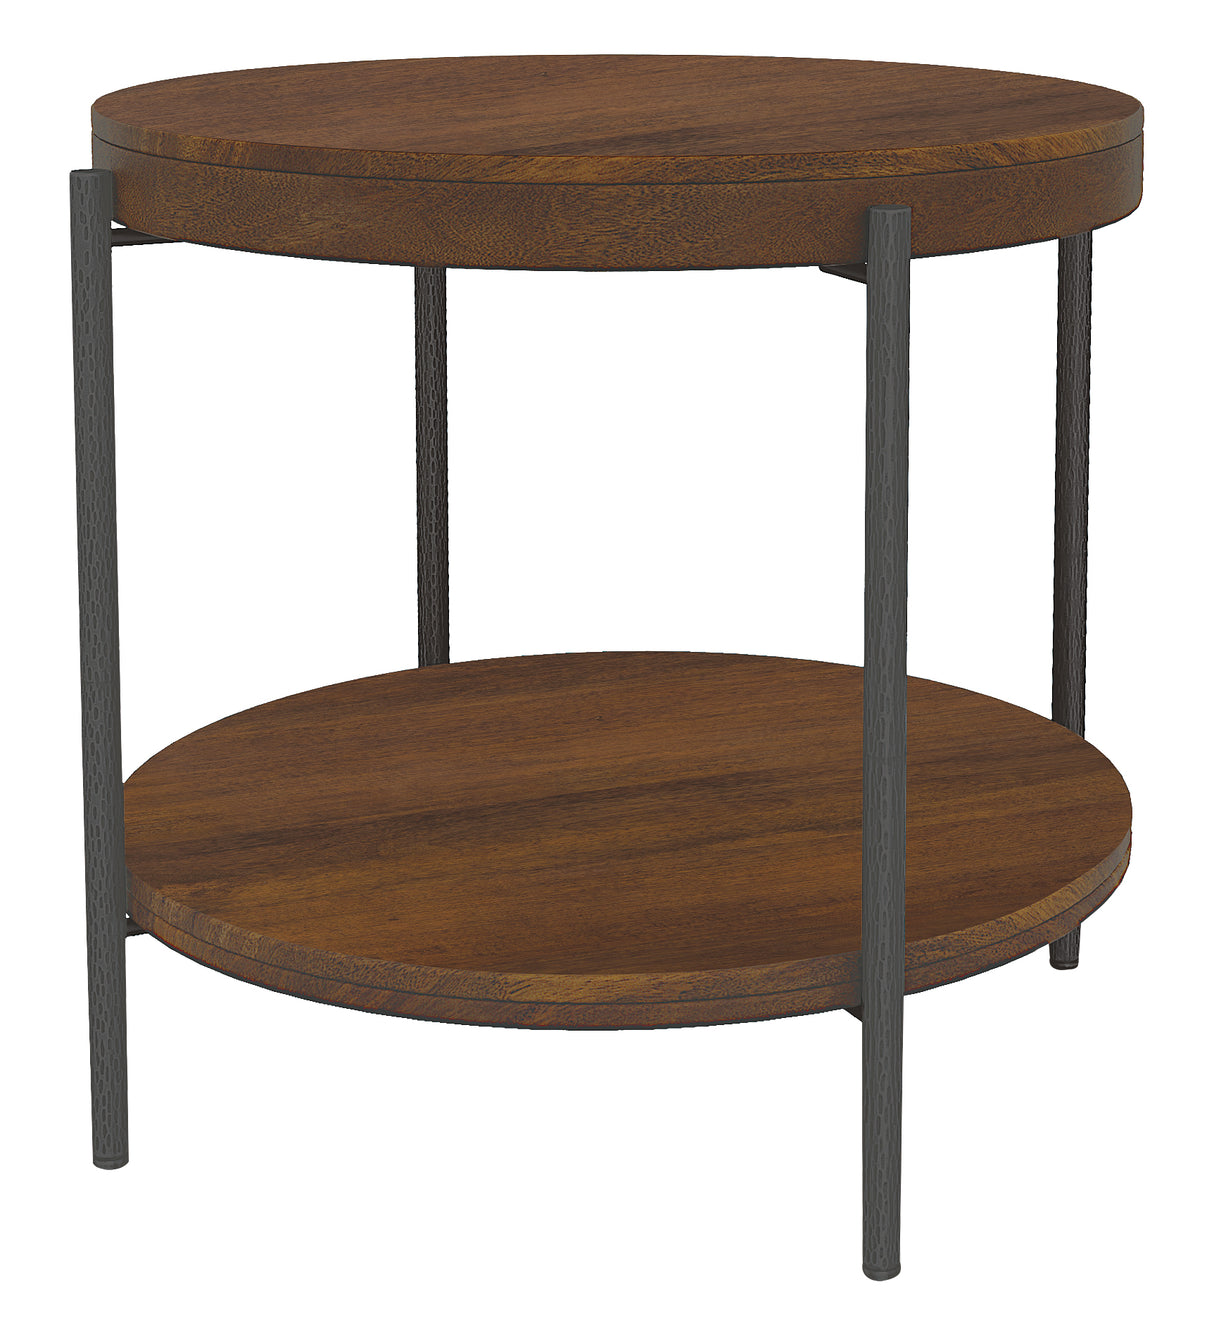 Hekman 26004 Bedford Park 30.25in. x 30.25in. x 28.25in. End Table